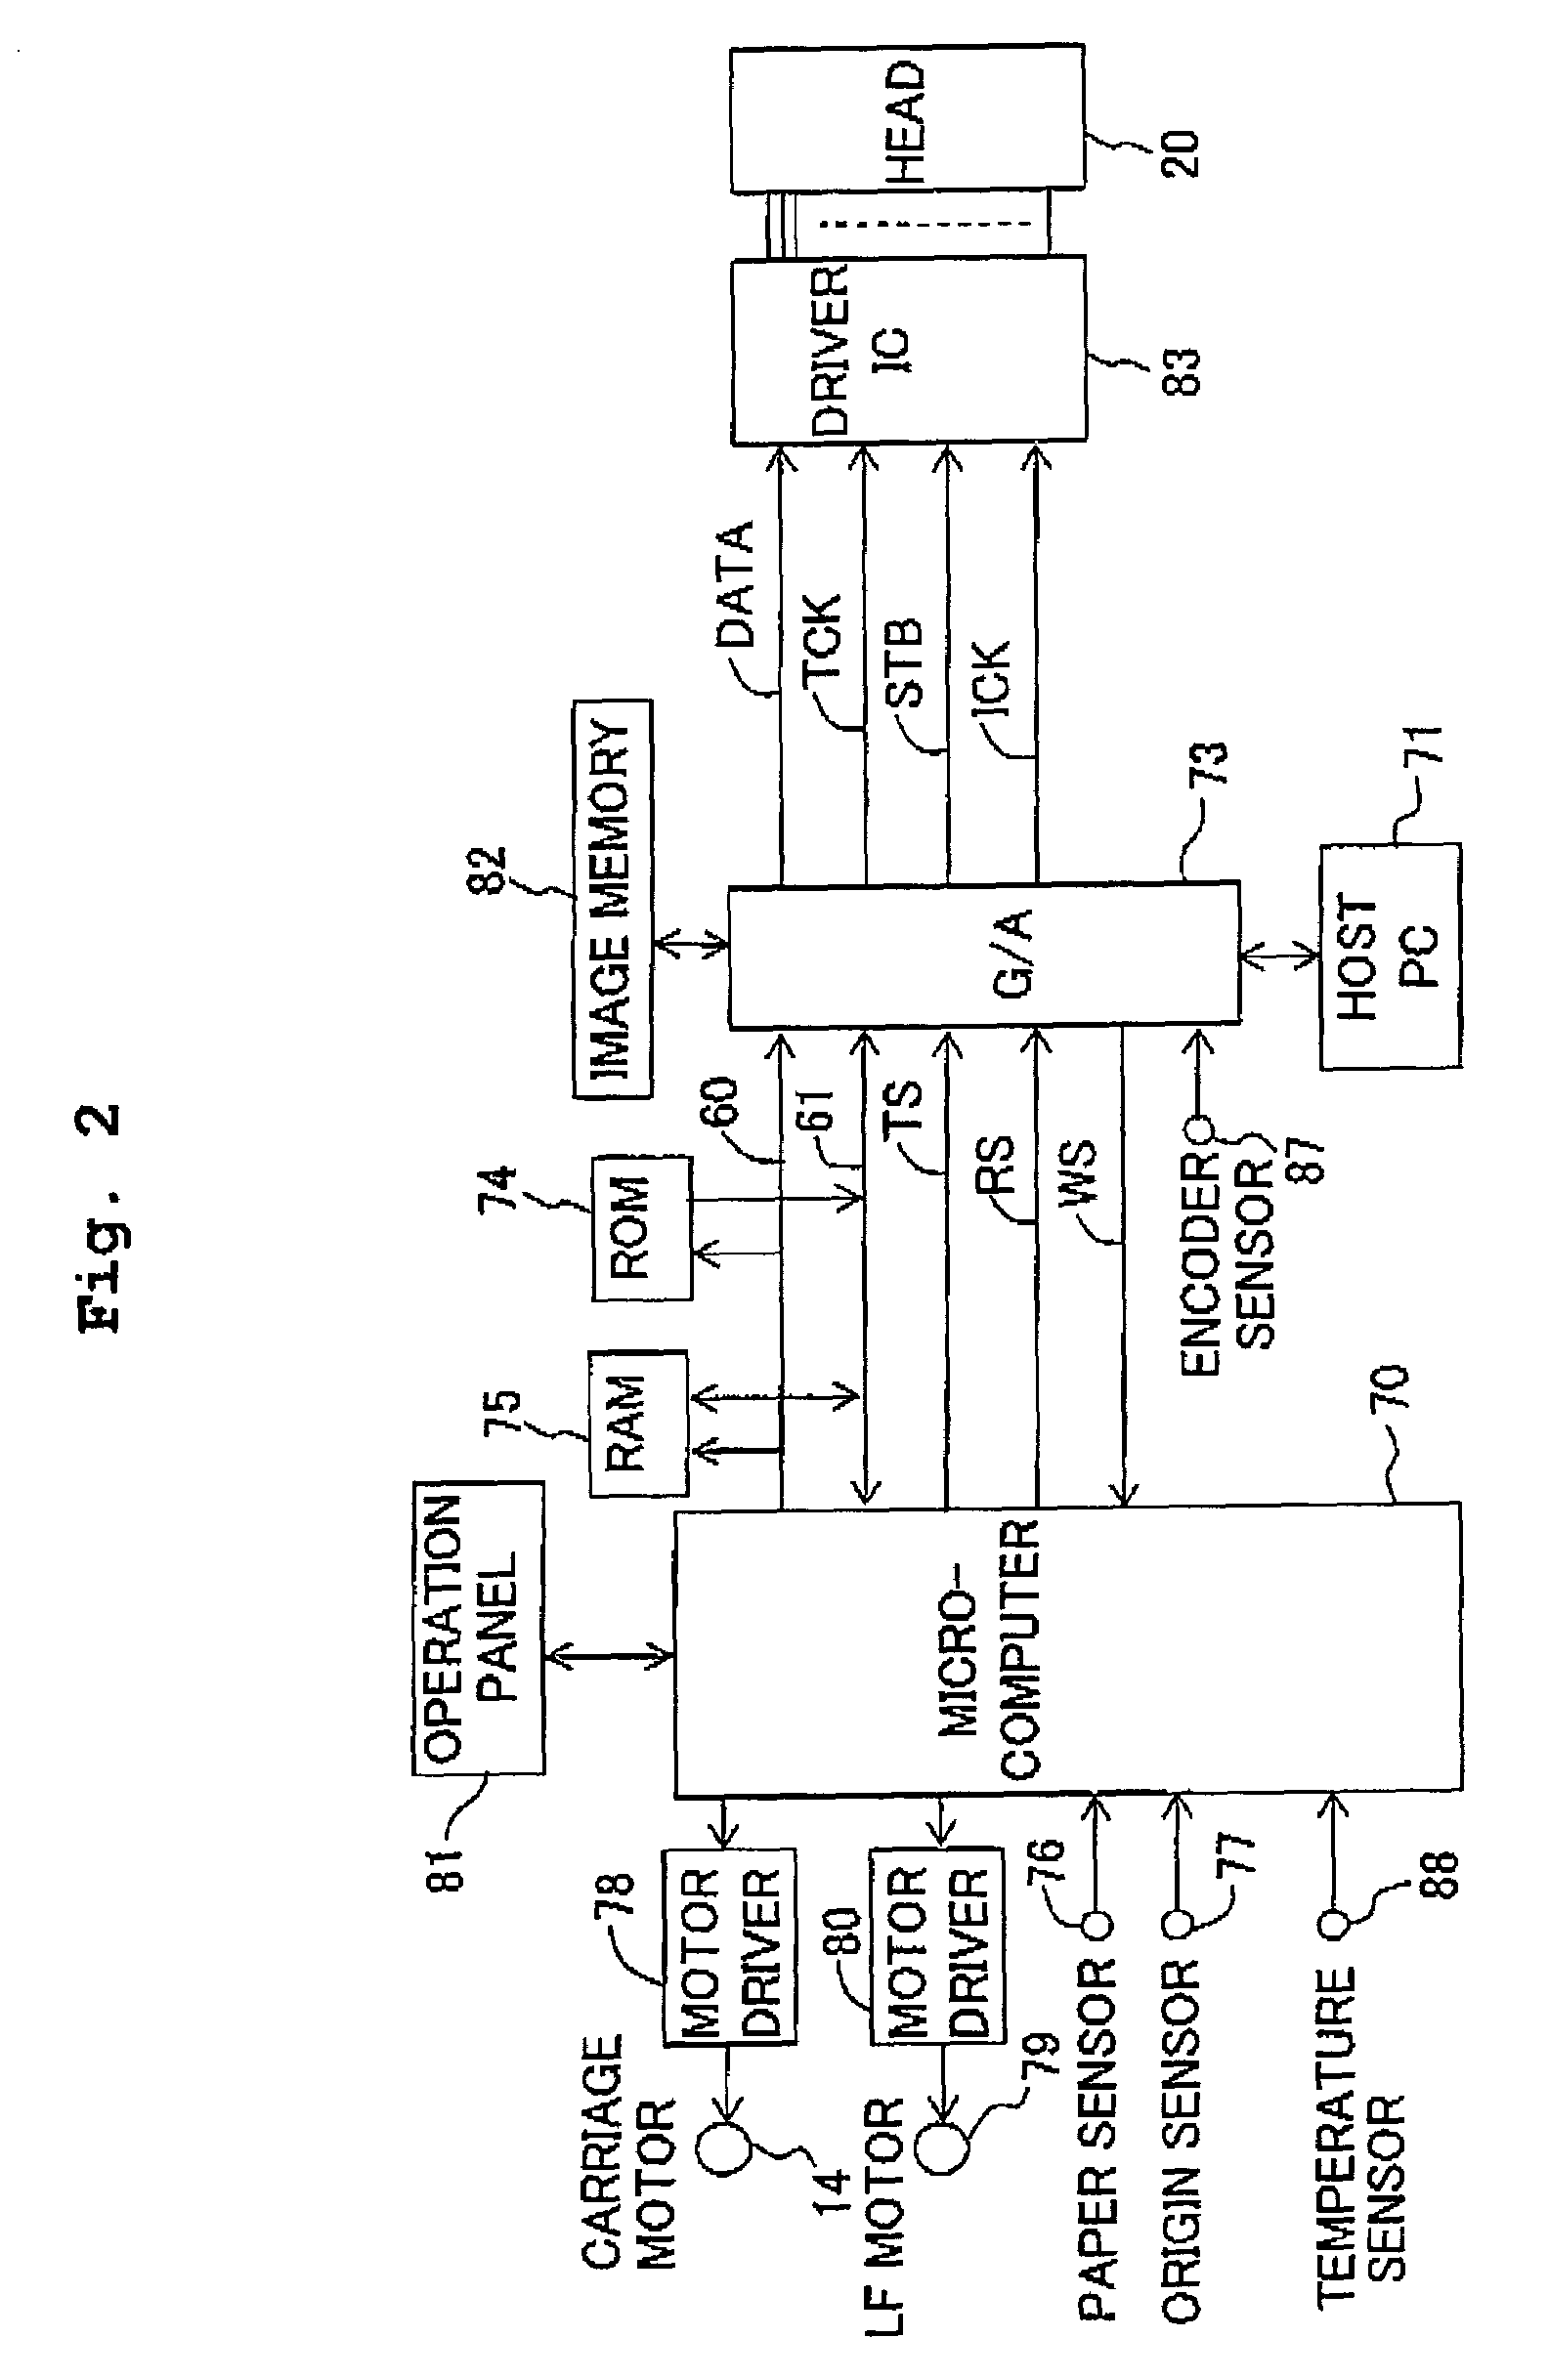 Ink-jet recording apparatus and recording method for realizing satisfactory recording even when ink temperature is suddenly changed